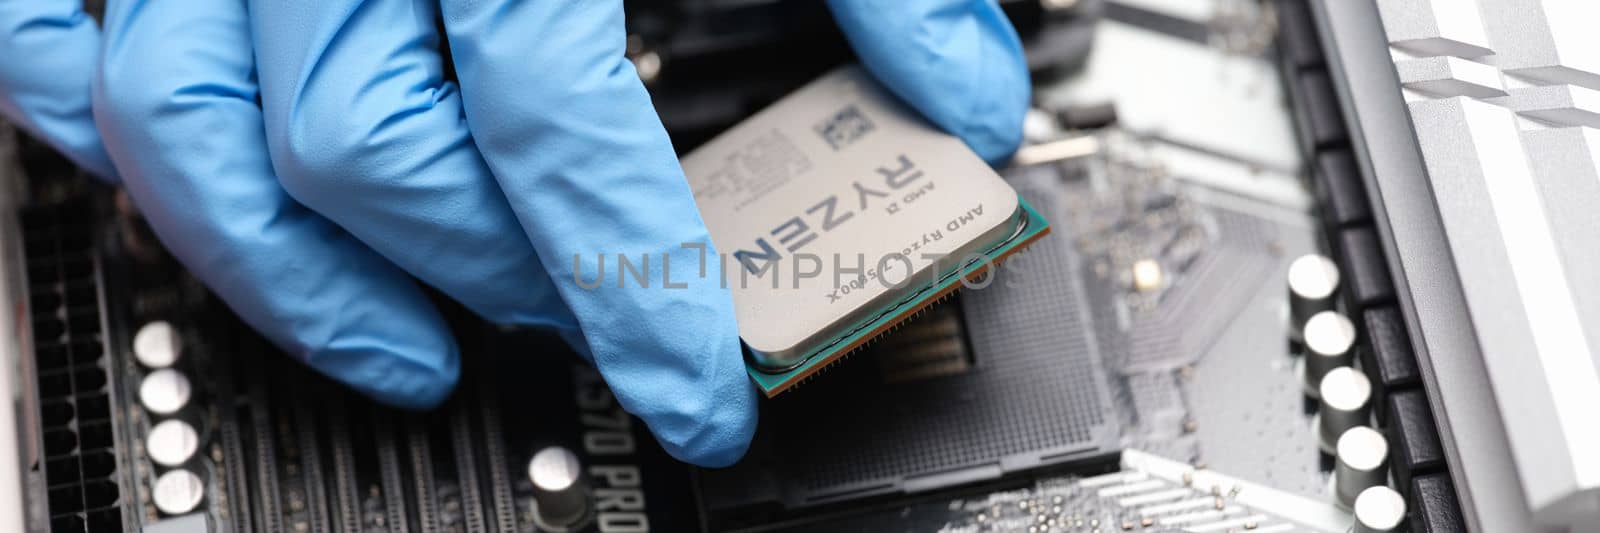 Tbilisi, Georgia - July 26, 2022: Installation of third generation Ryzen processor on motherboard by kuprevich